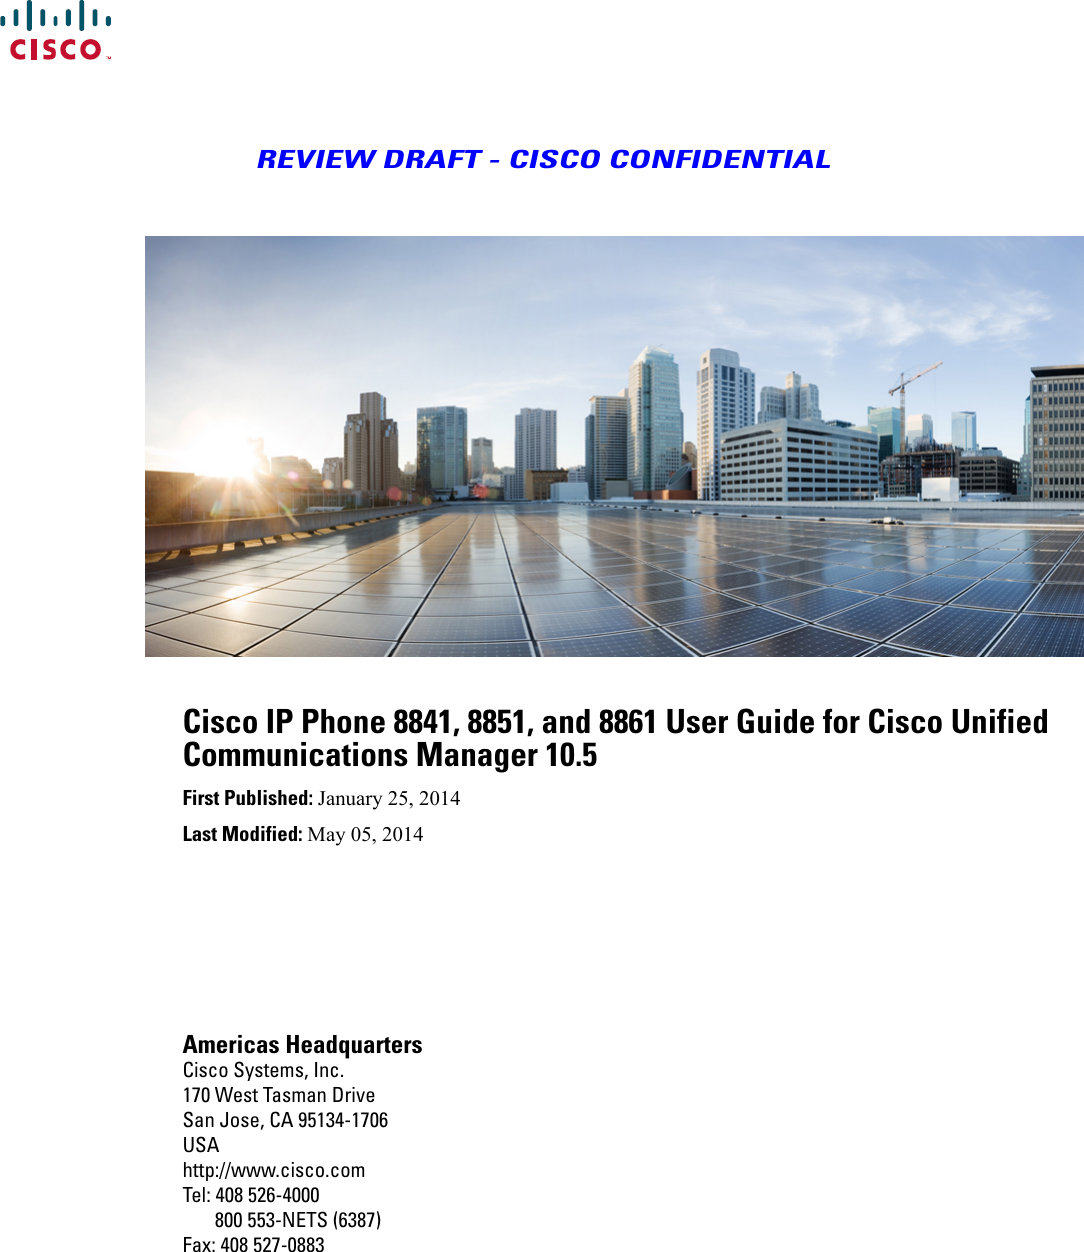 REVIEW DRAFT - CISCO CONFIDENTIALCisco IP Phone 8841, 8851, and 8861 User Guide for Cisco UnifiedCommunications Manager 10.5First Published: January 25, 2014Last Modified: May 05, 2014Americas HeadquartersCisco Systems, Inc.170 West Tasman DriveSan Jose, CA 95134-1706USAhttp://www.cisco.comTel: 408 526-4000       800 553-NETS (6387)Fax: 408 527-0883